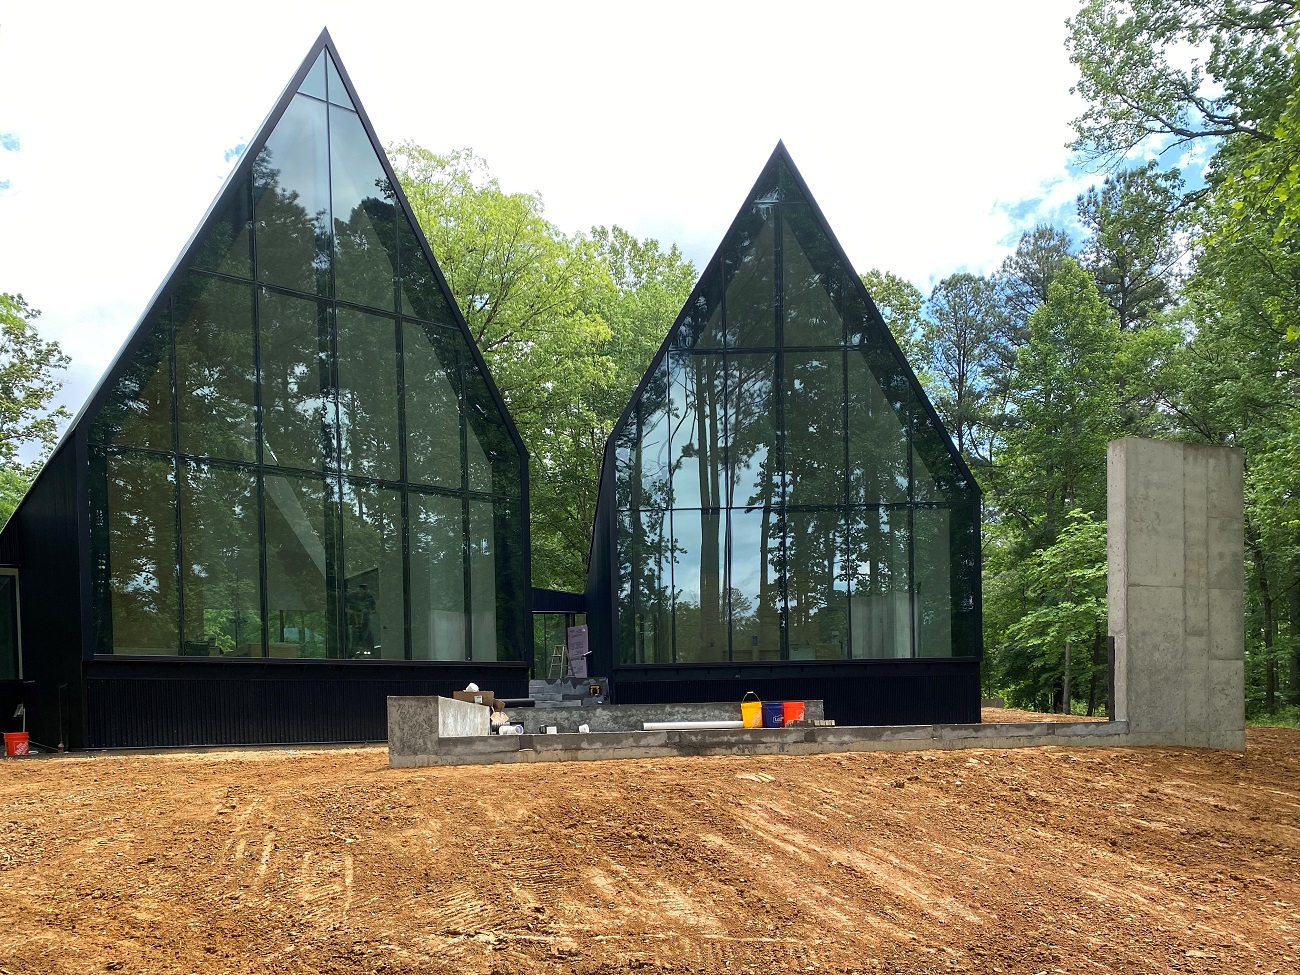 Daylight photograph of the Steeplechase House highlighting it's high pitch A-frame facade made of glass.